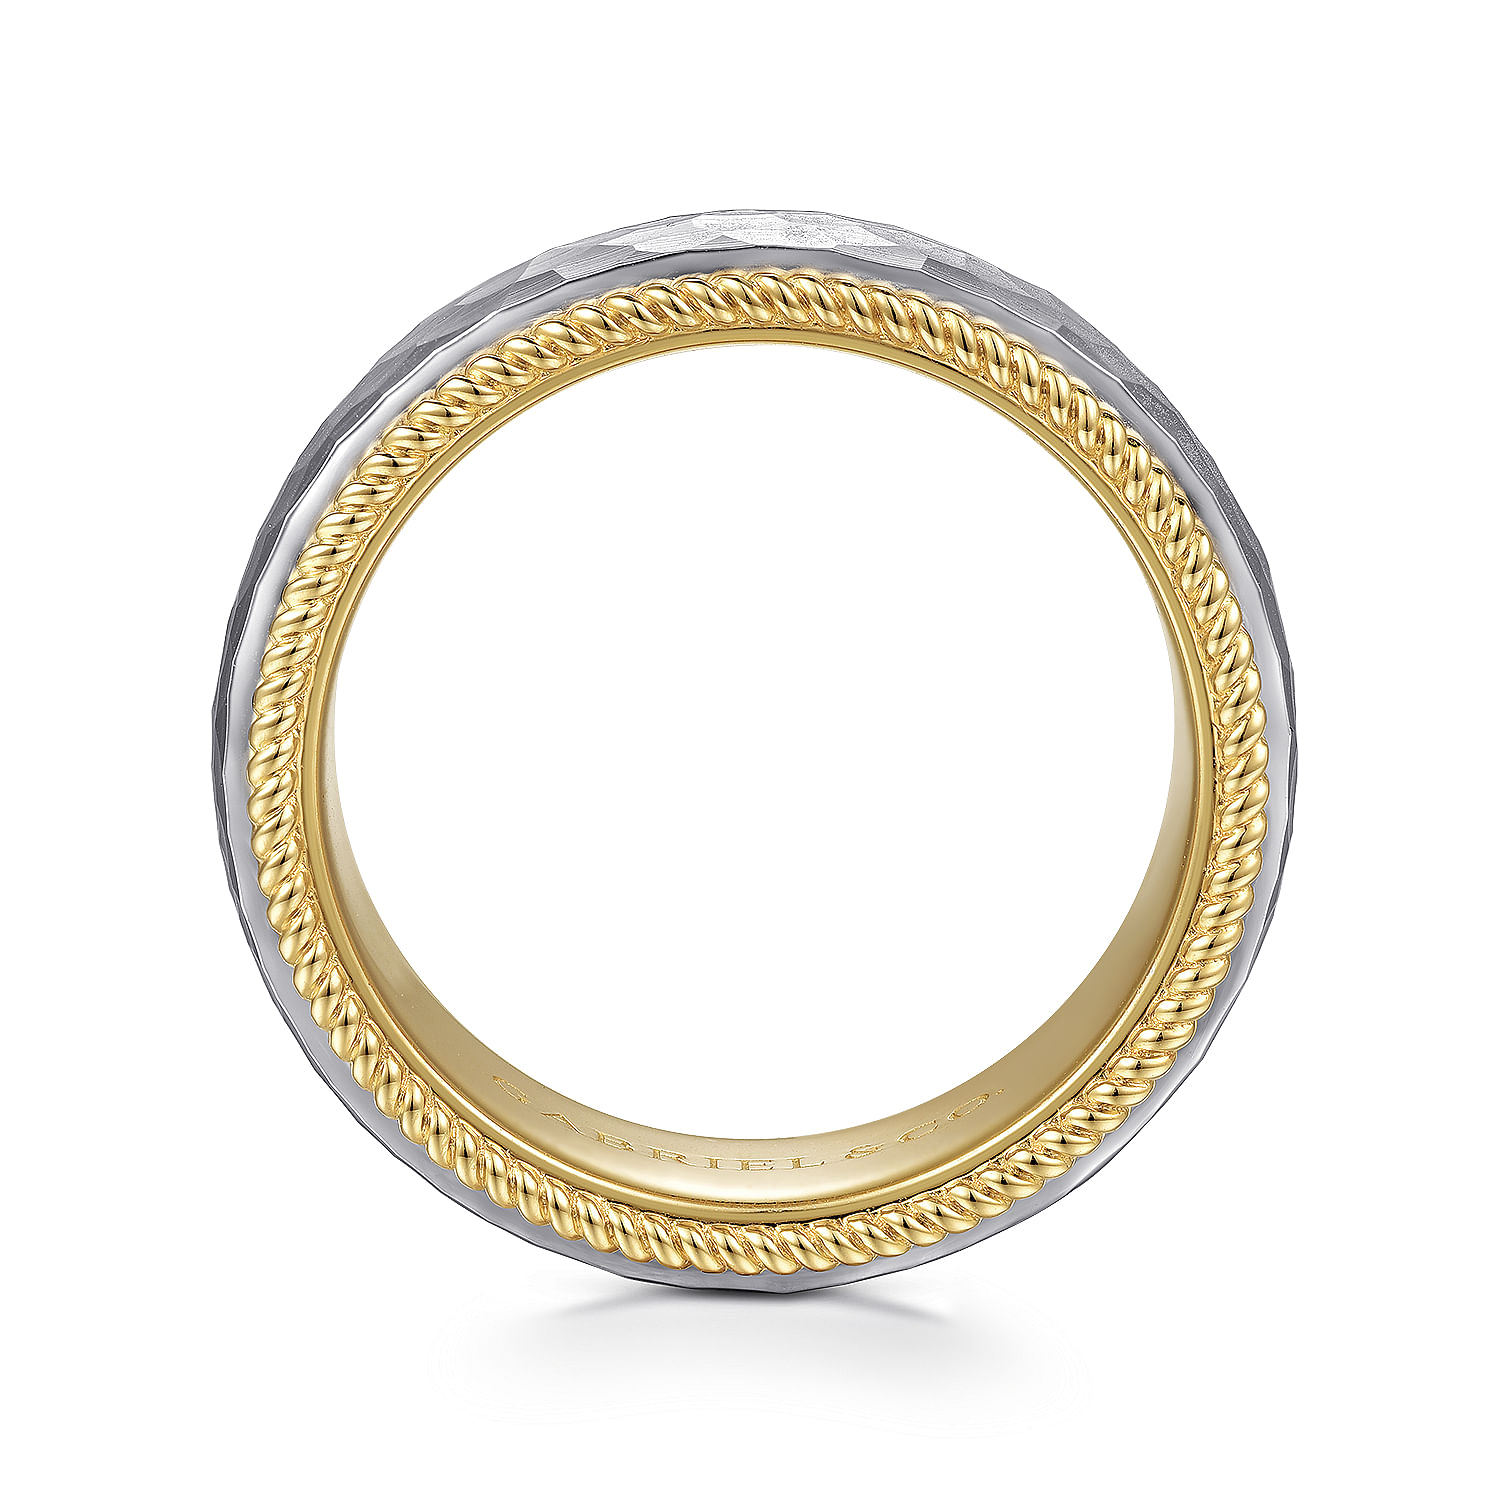 14K White-Yellow Gold 8mm - Two Tone Men's Wedding Band in Hammered Finish